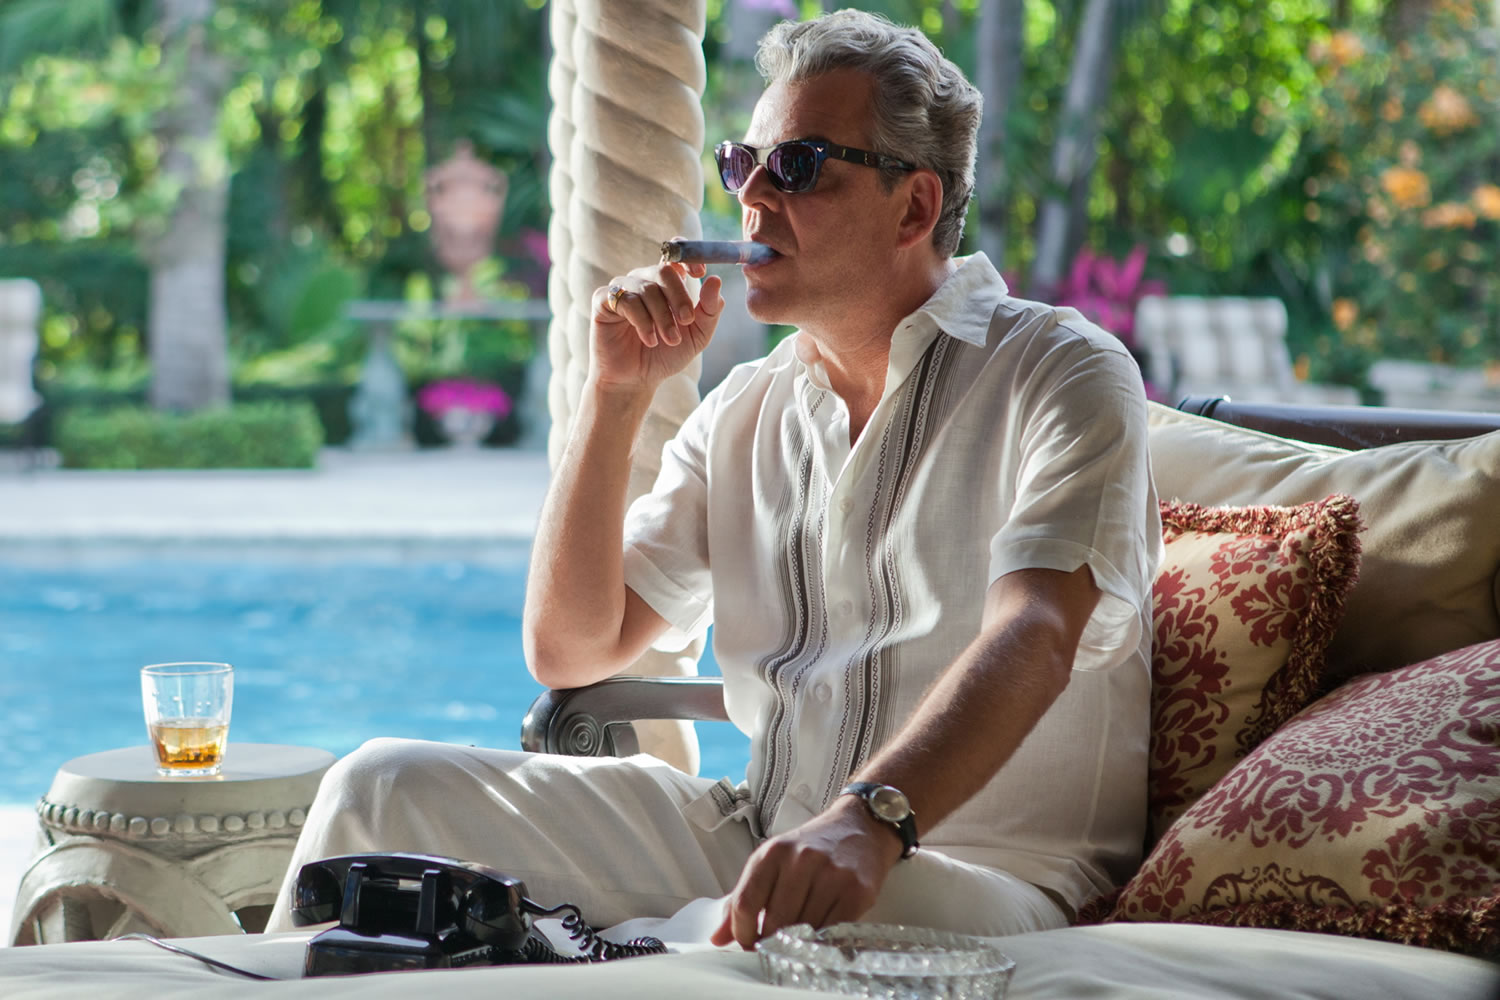 This publicity image released by Starz, shows Danny Huston in a scene from the second season of the series &quot;Magic City,&quot; set in Miami, Fla.  The second season premieres Friday, June 14 at 9 p.m. on Starz.